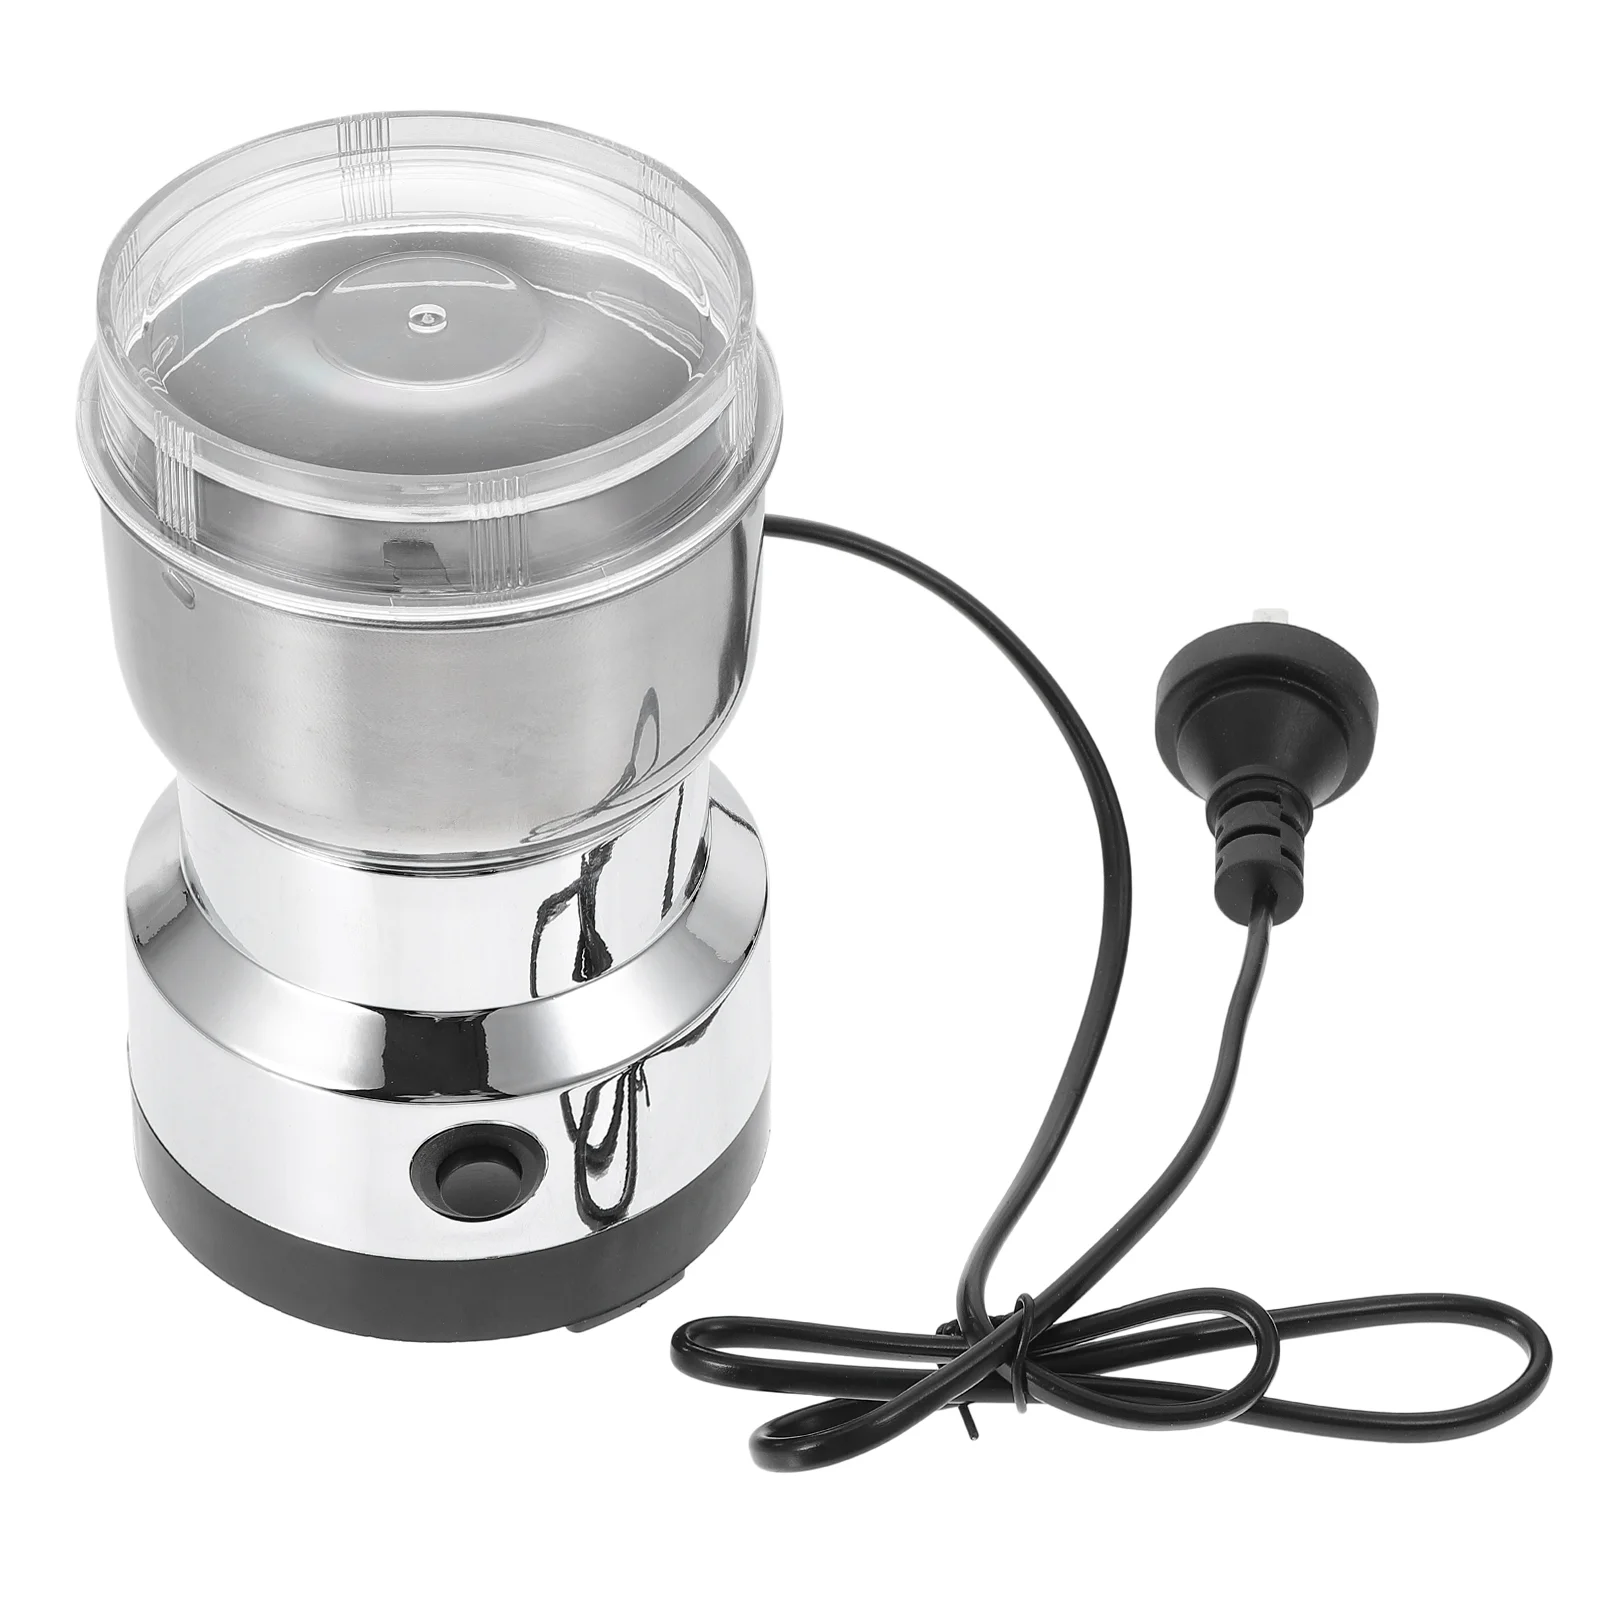 

Electric Coffee Spice Beans Maker with Stainless Steel Blades for Home Kitchen Grinding Supplies with AU Plug Espresso Machine